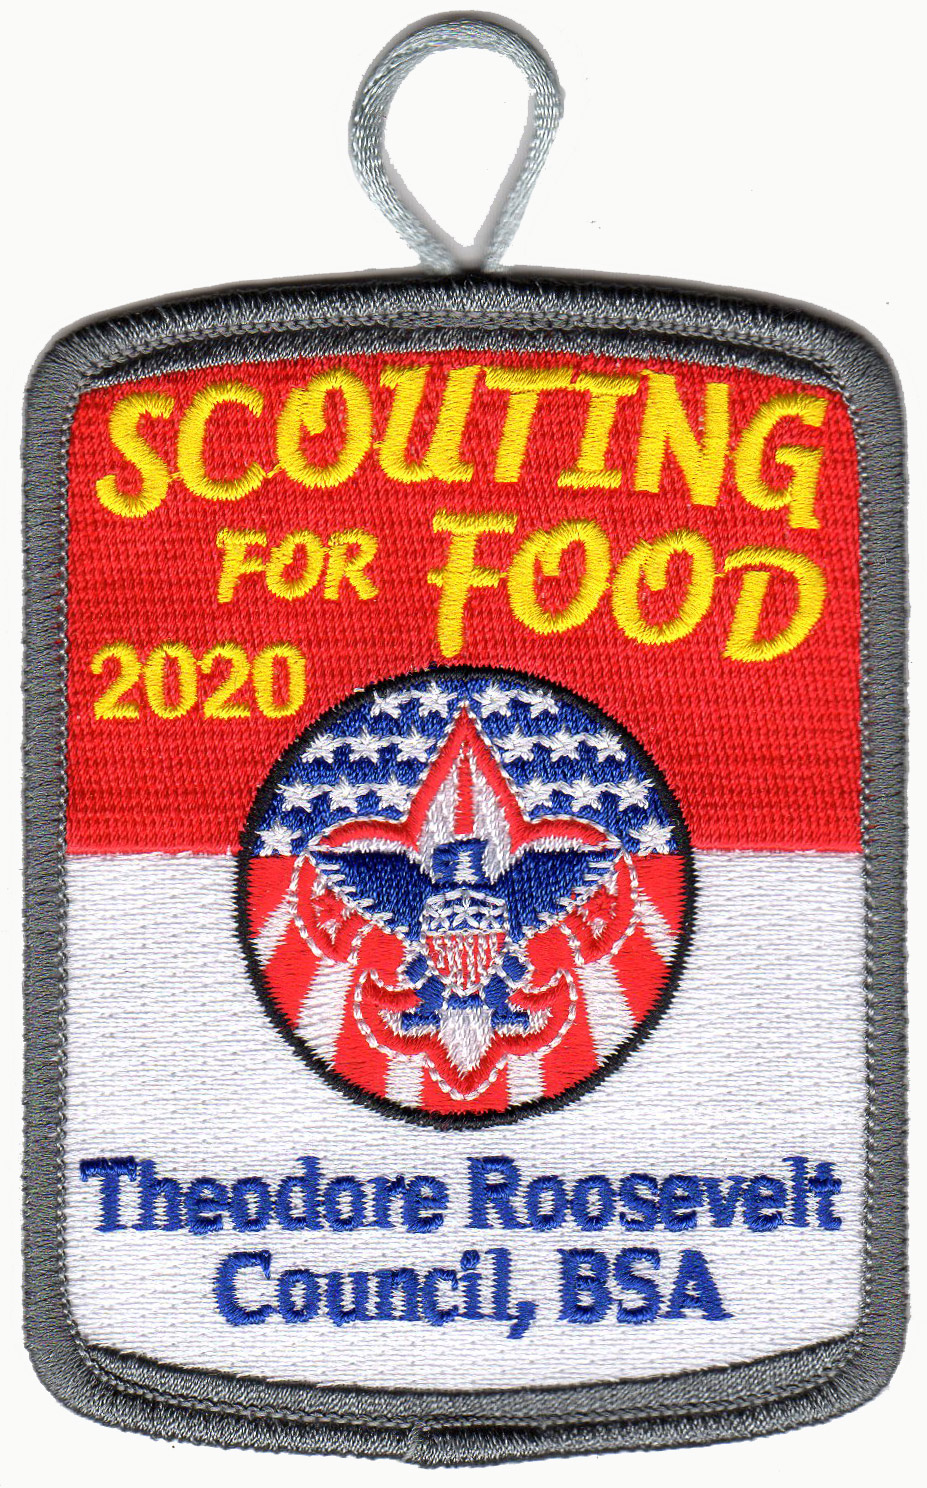 2020 Scouting for Food